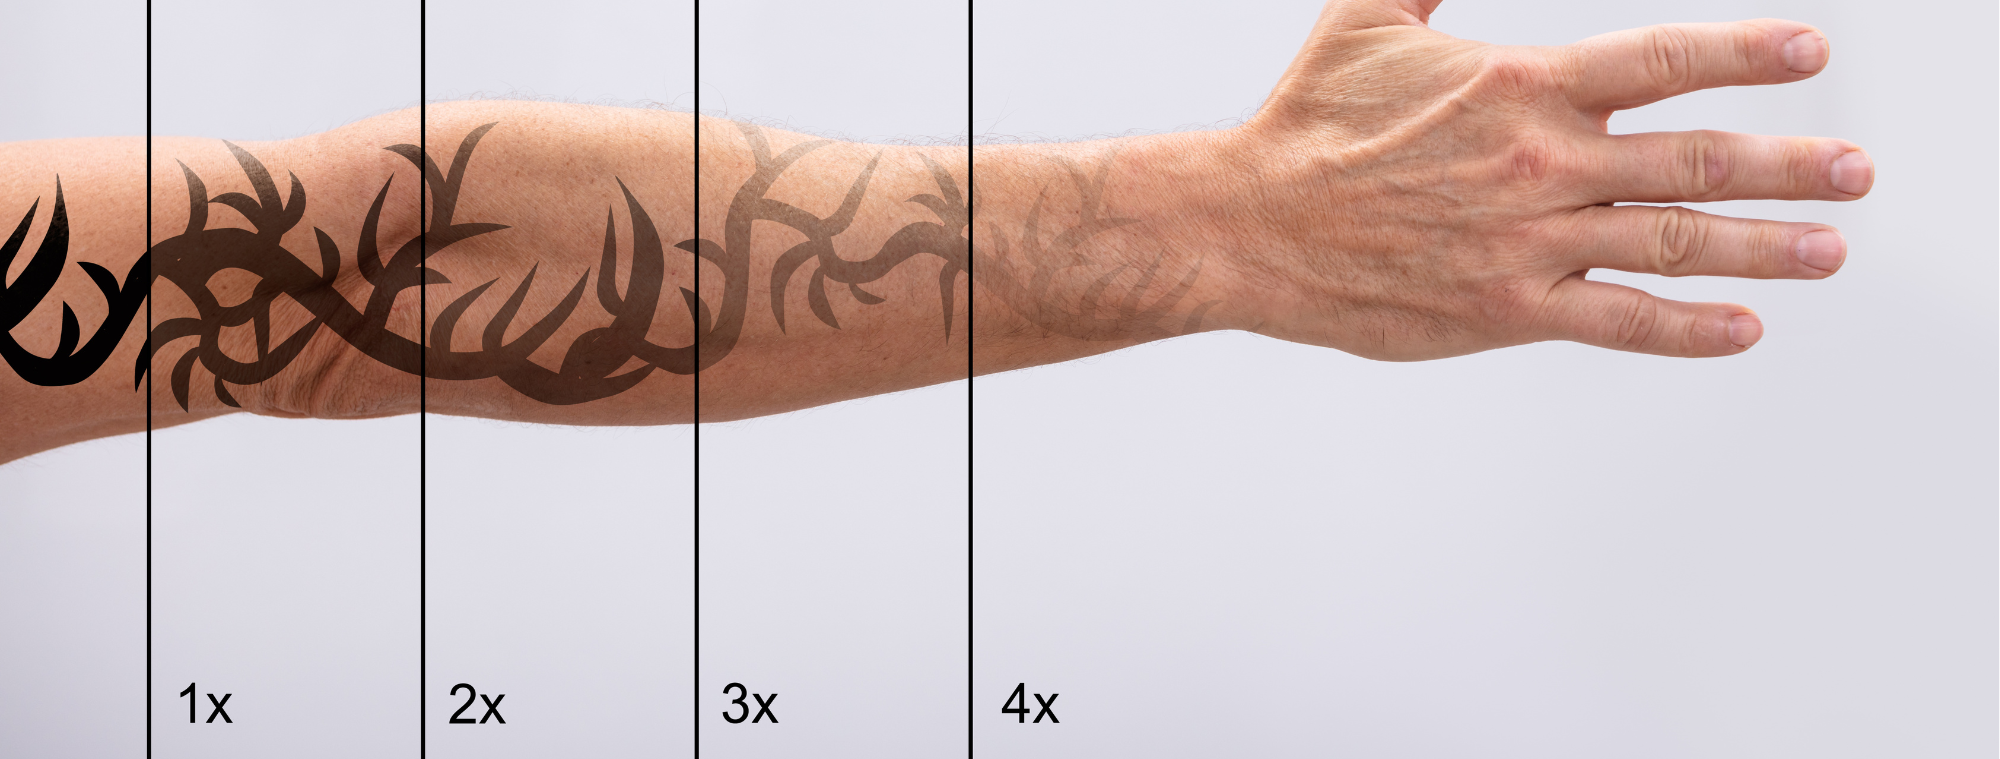 What Exactly Happens During The Laser Tattoo Removal Process?